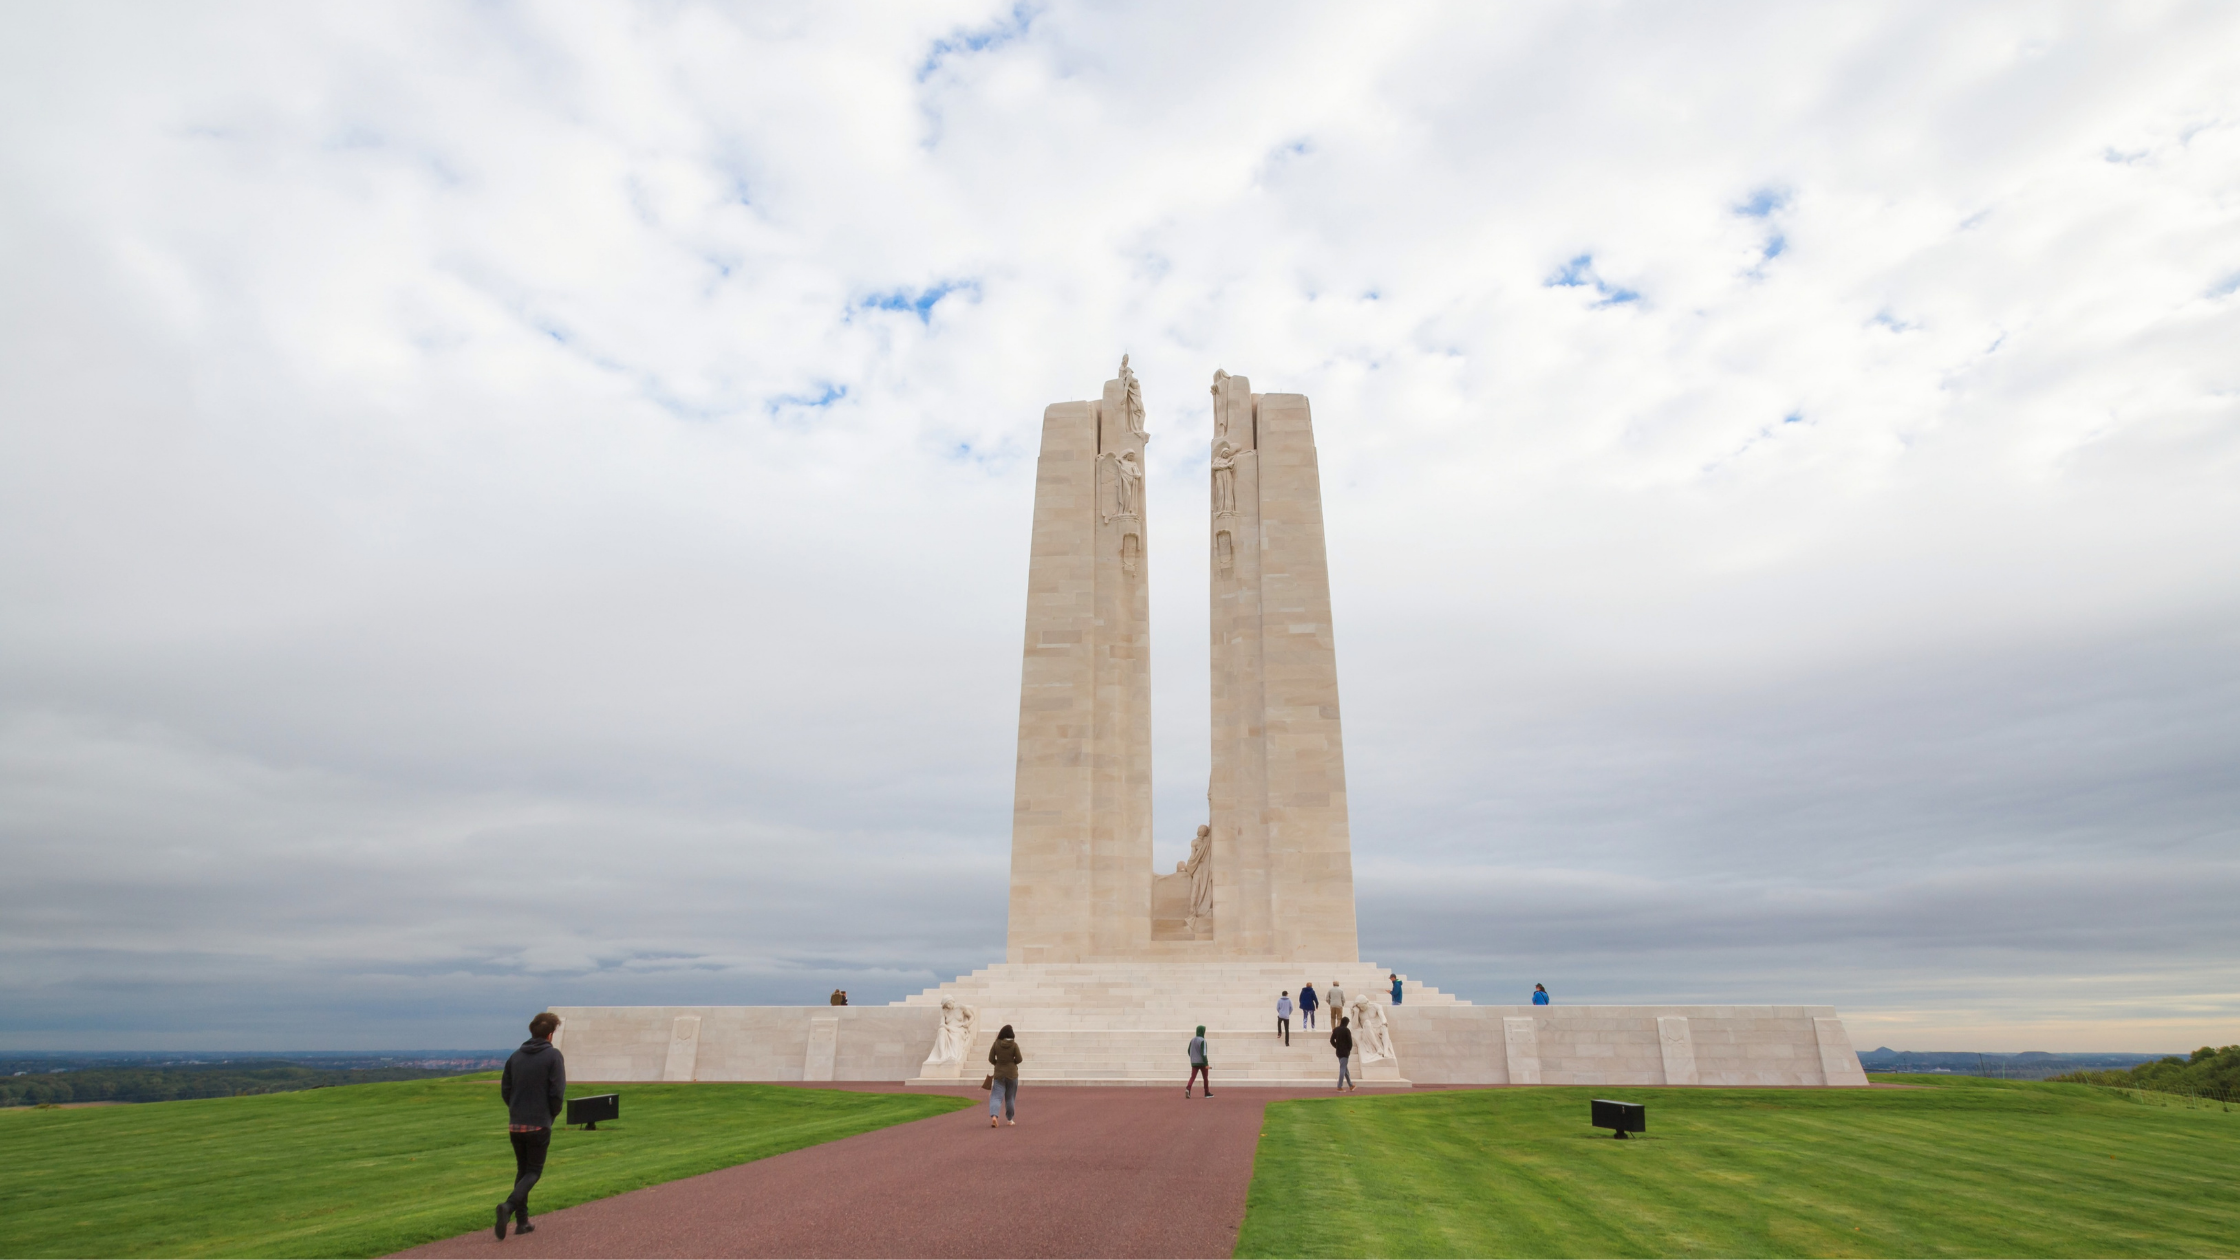 Birth of a Nation: The Battle of Vimy Ridge [Classroom Resources]